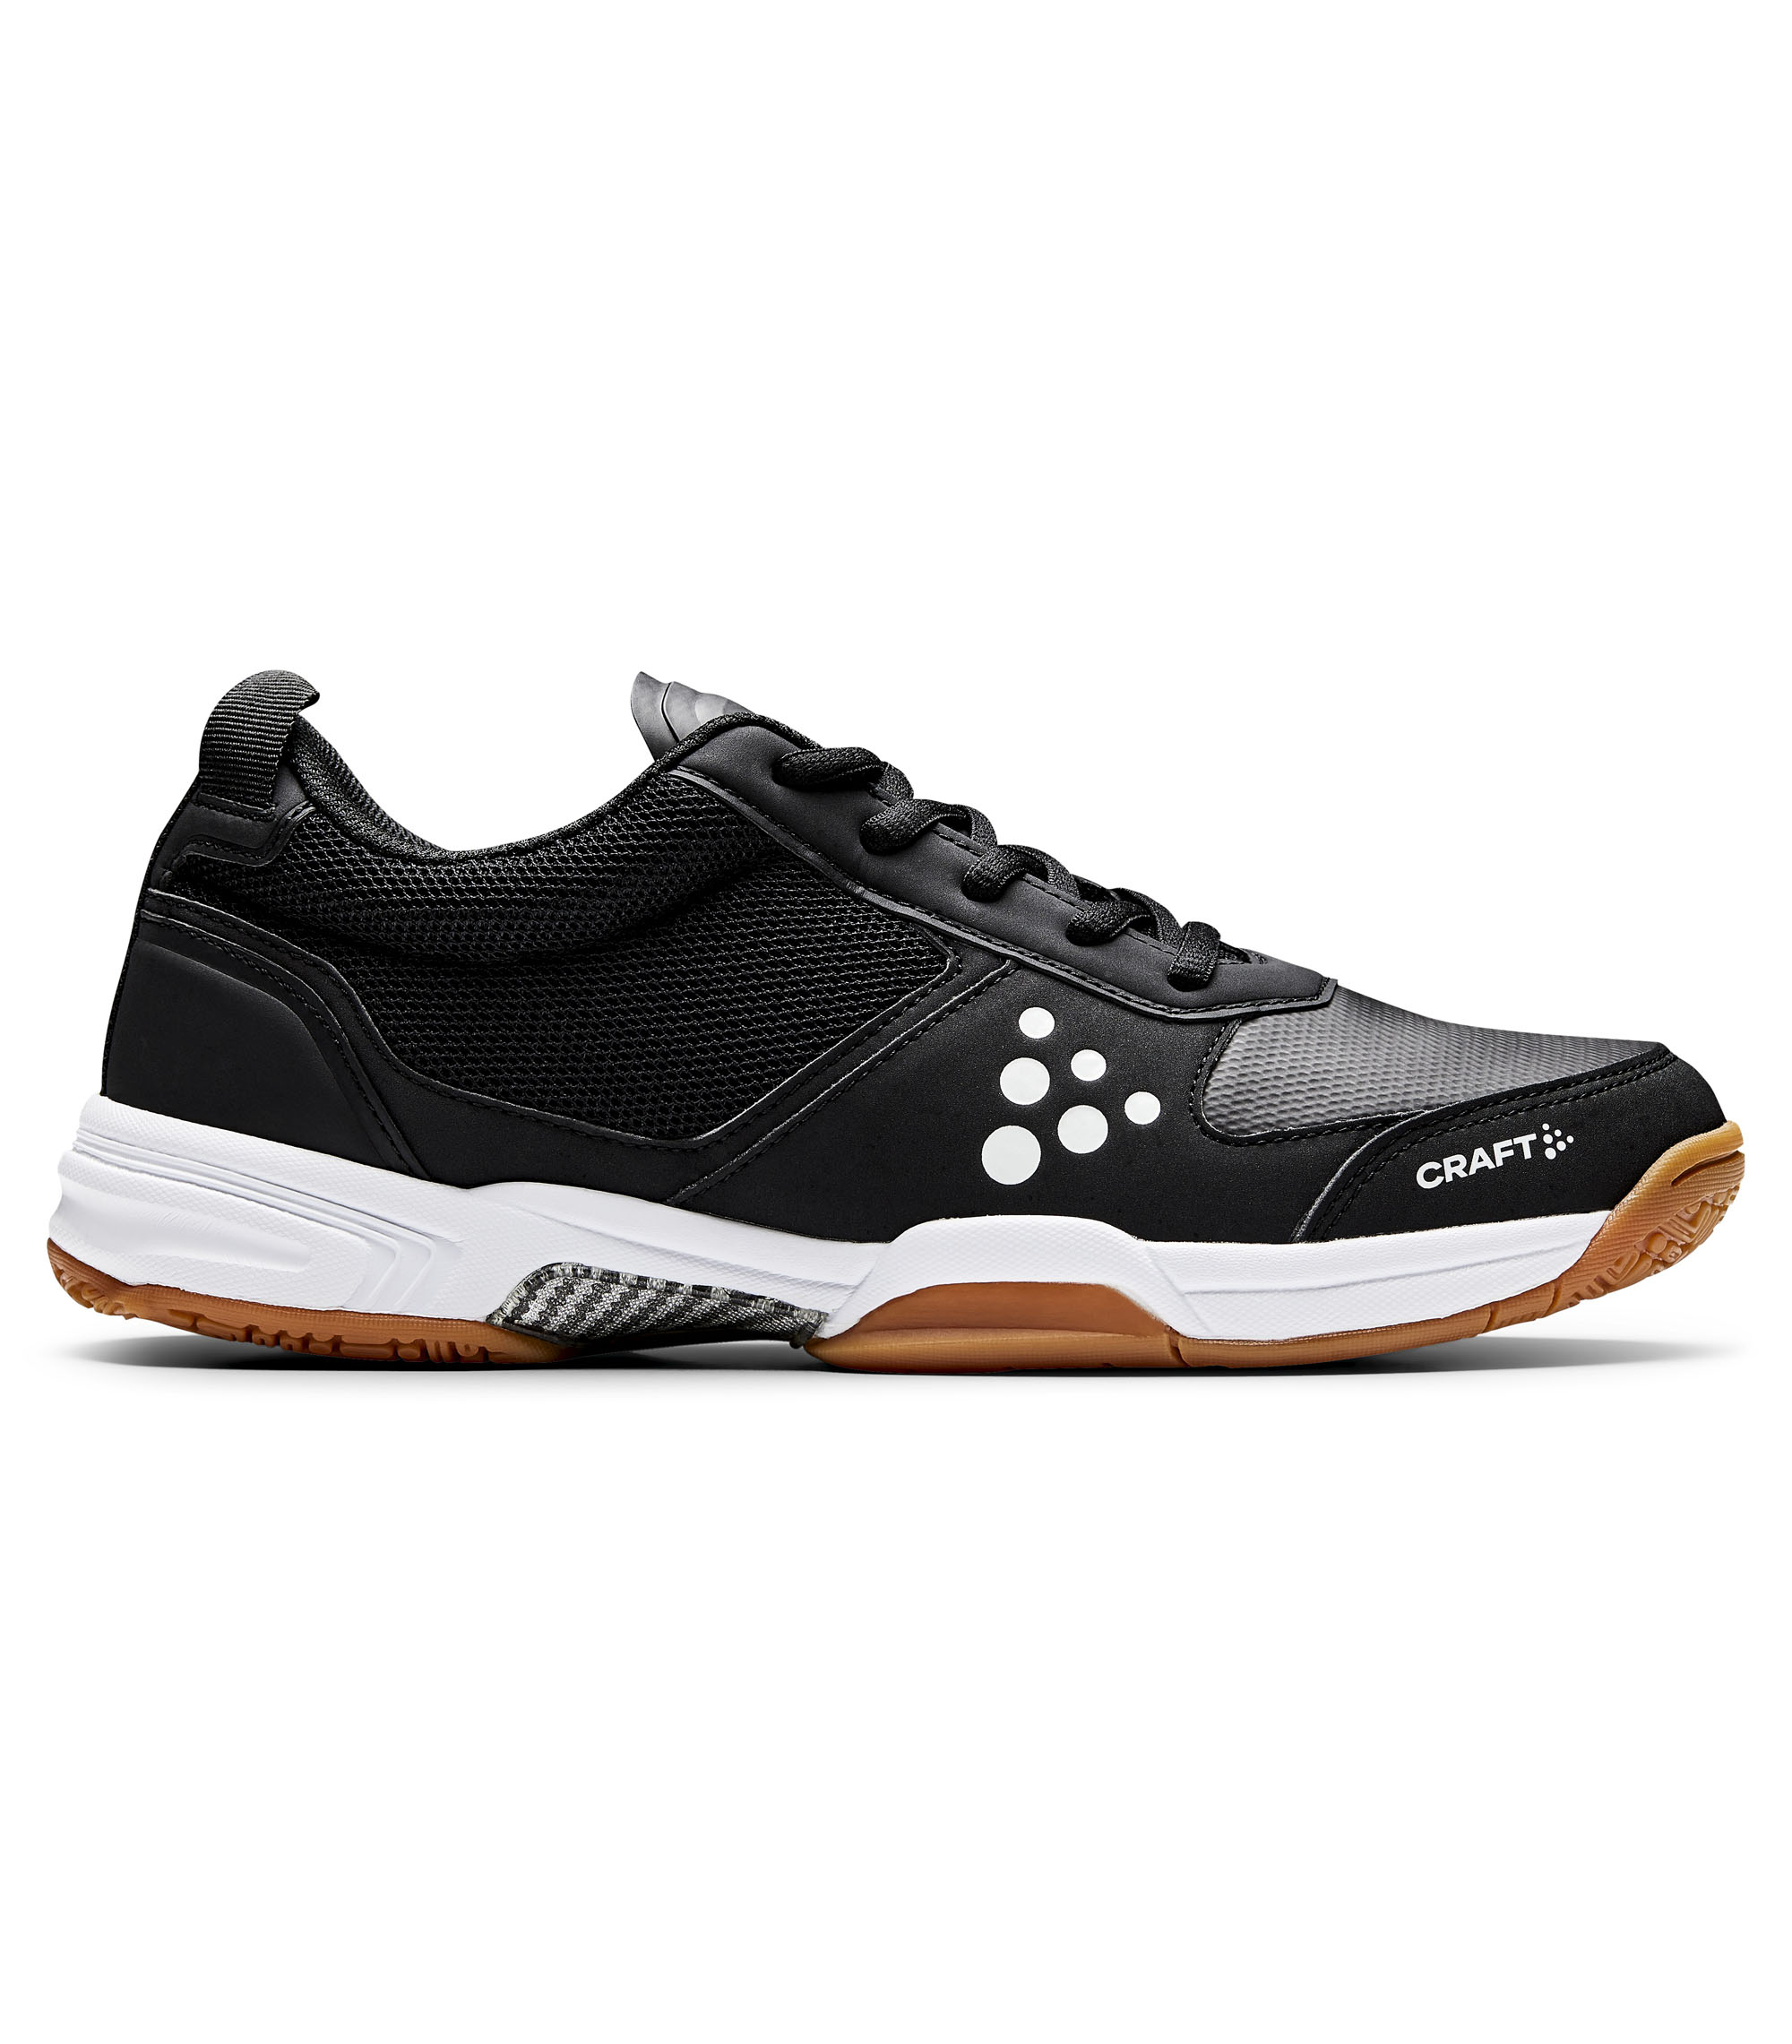 CRAFT_TEAMSPORT_C1908275-999900_I2_CONTROL_black_white_chaussures_indoor_lady_sg_equipement